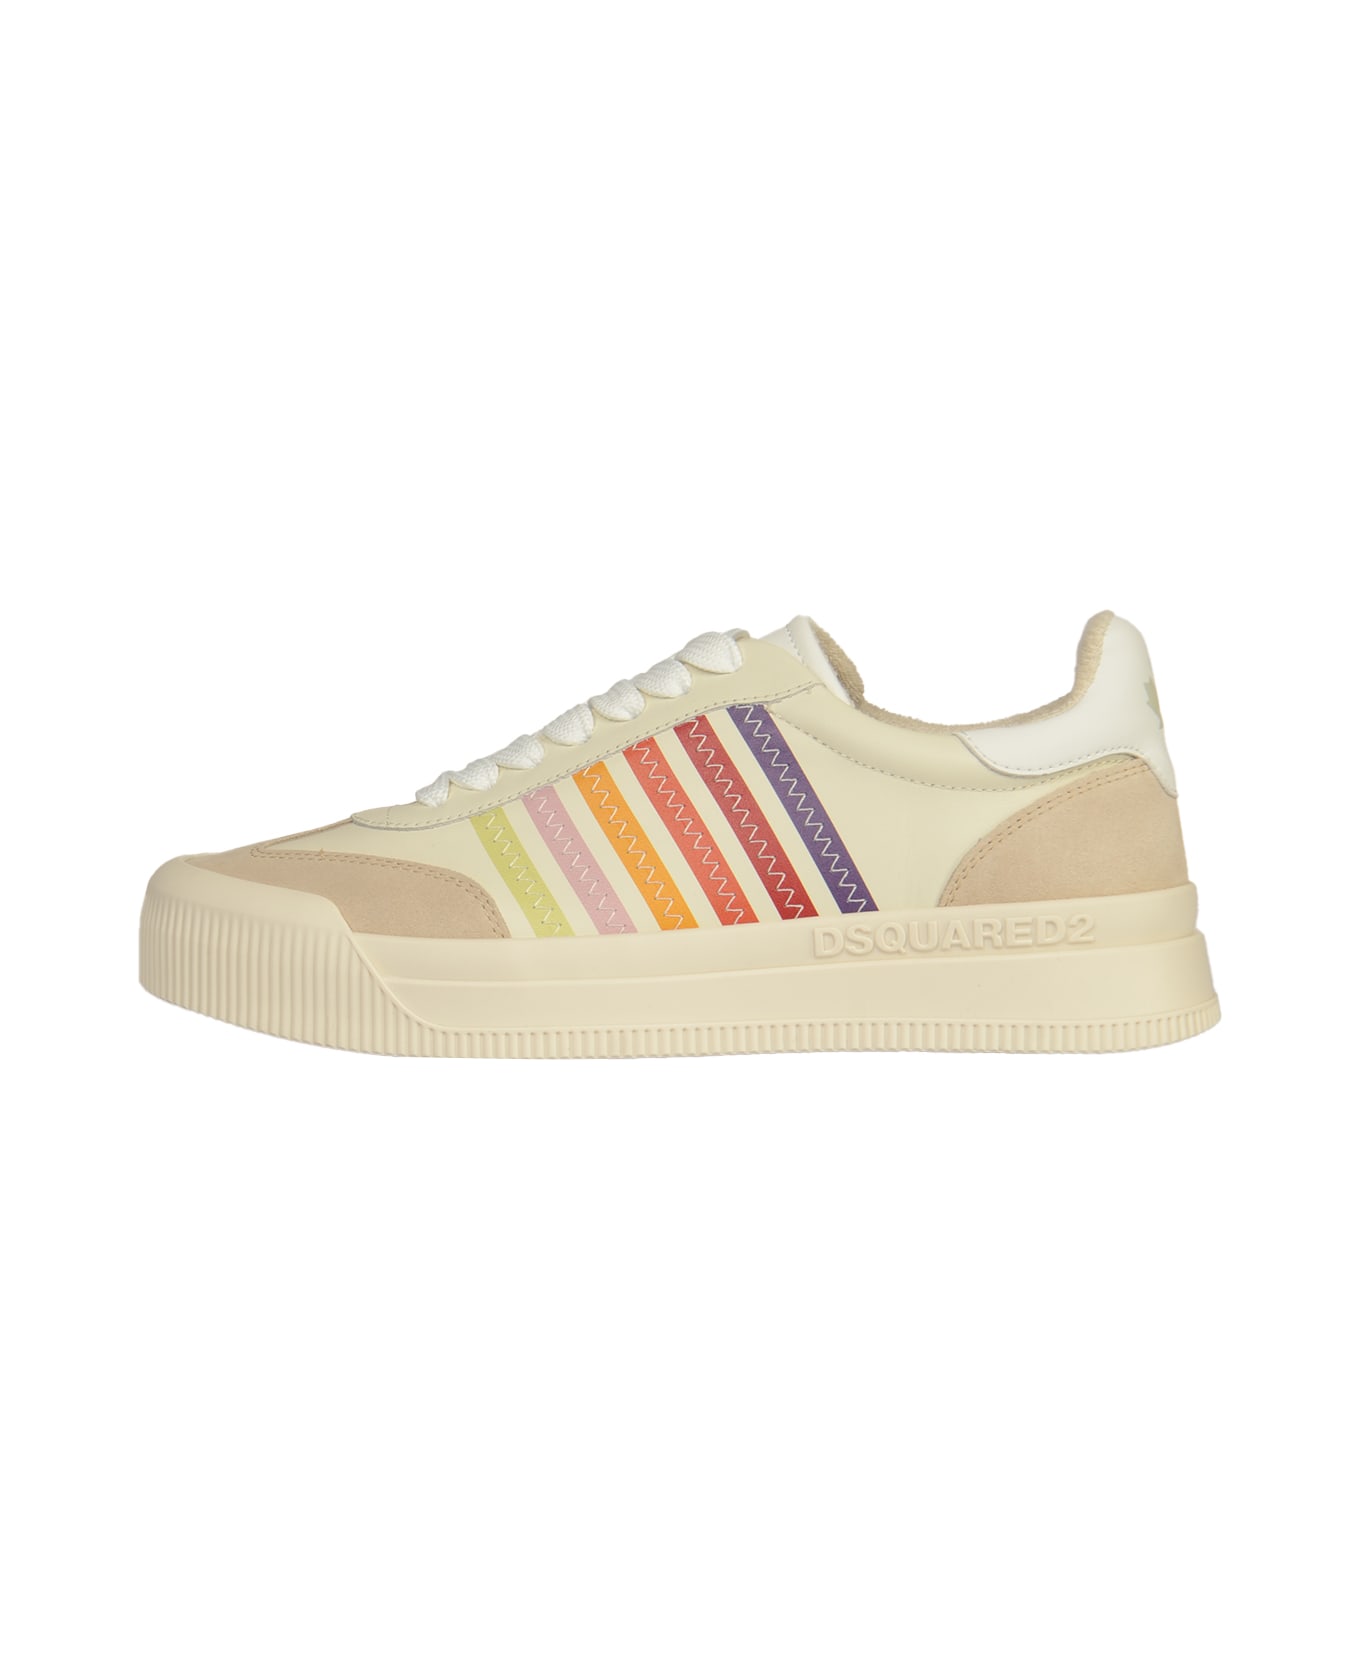 Dsquared2 New Jersey Sneakers - Beige/Multicolor スニーカー